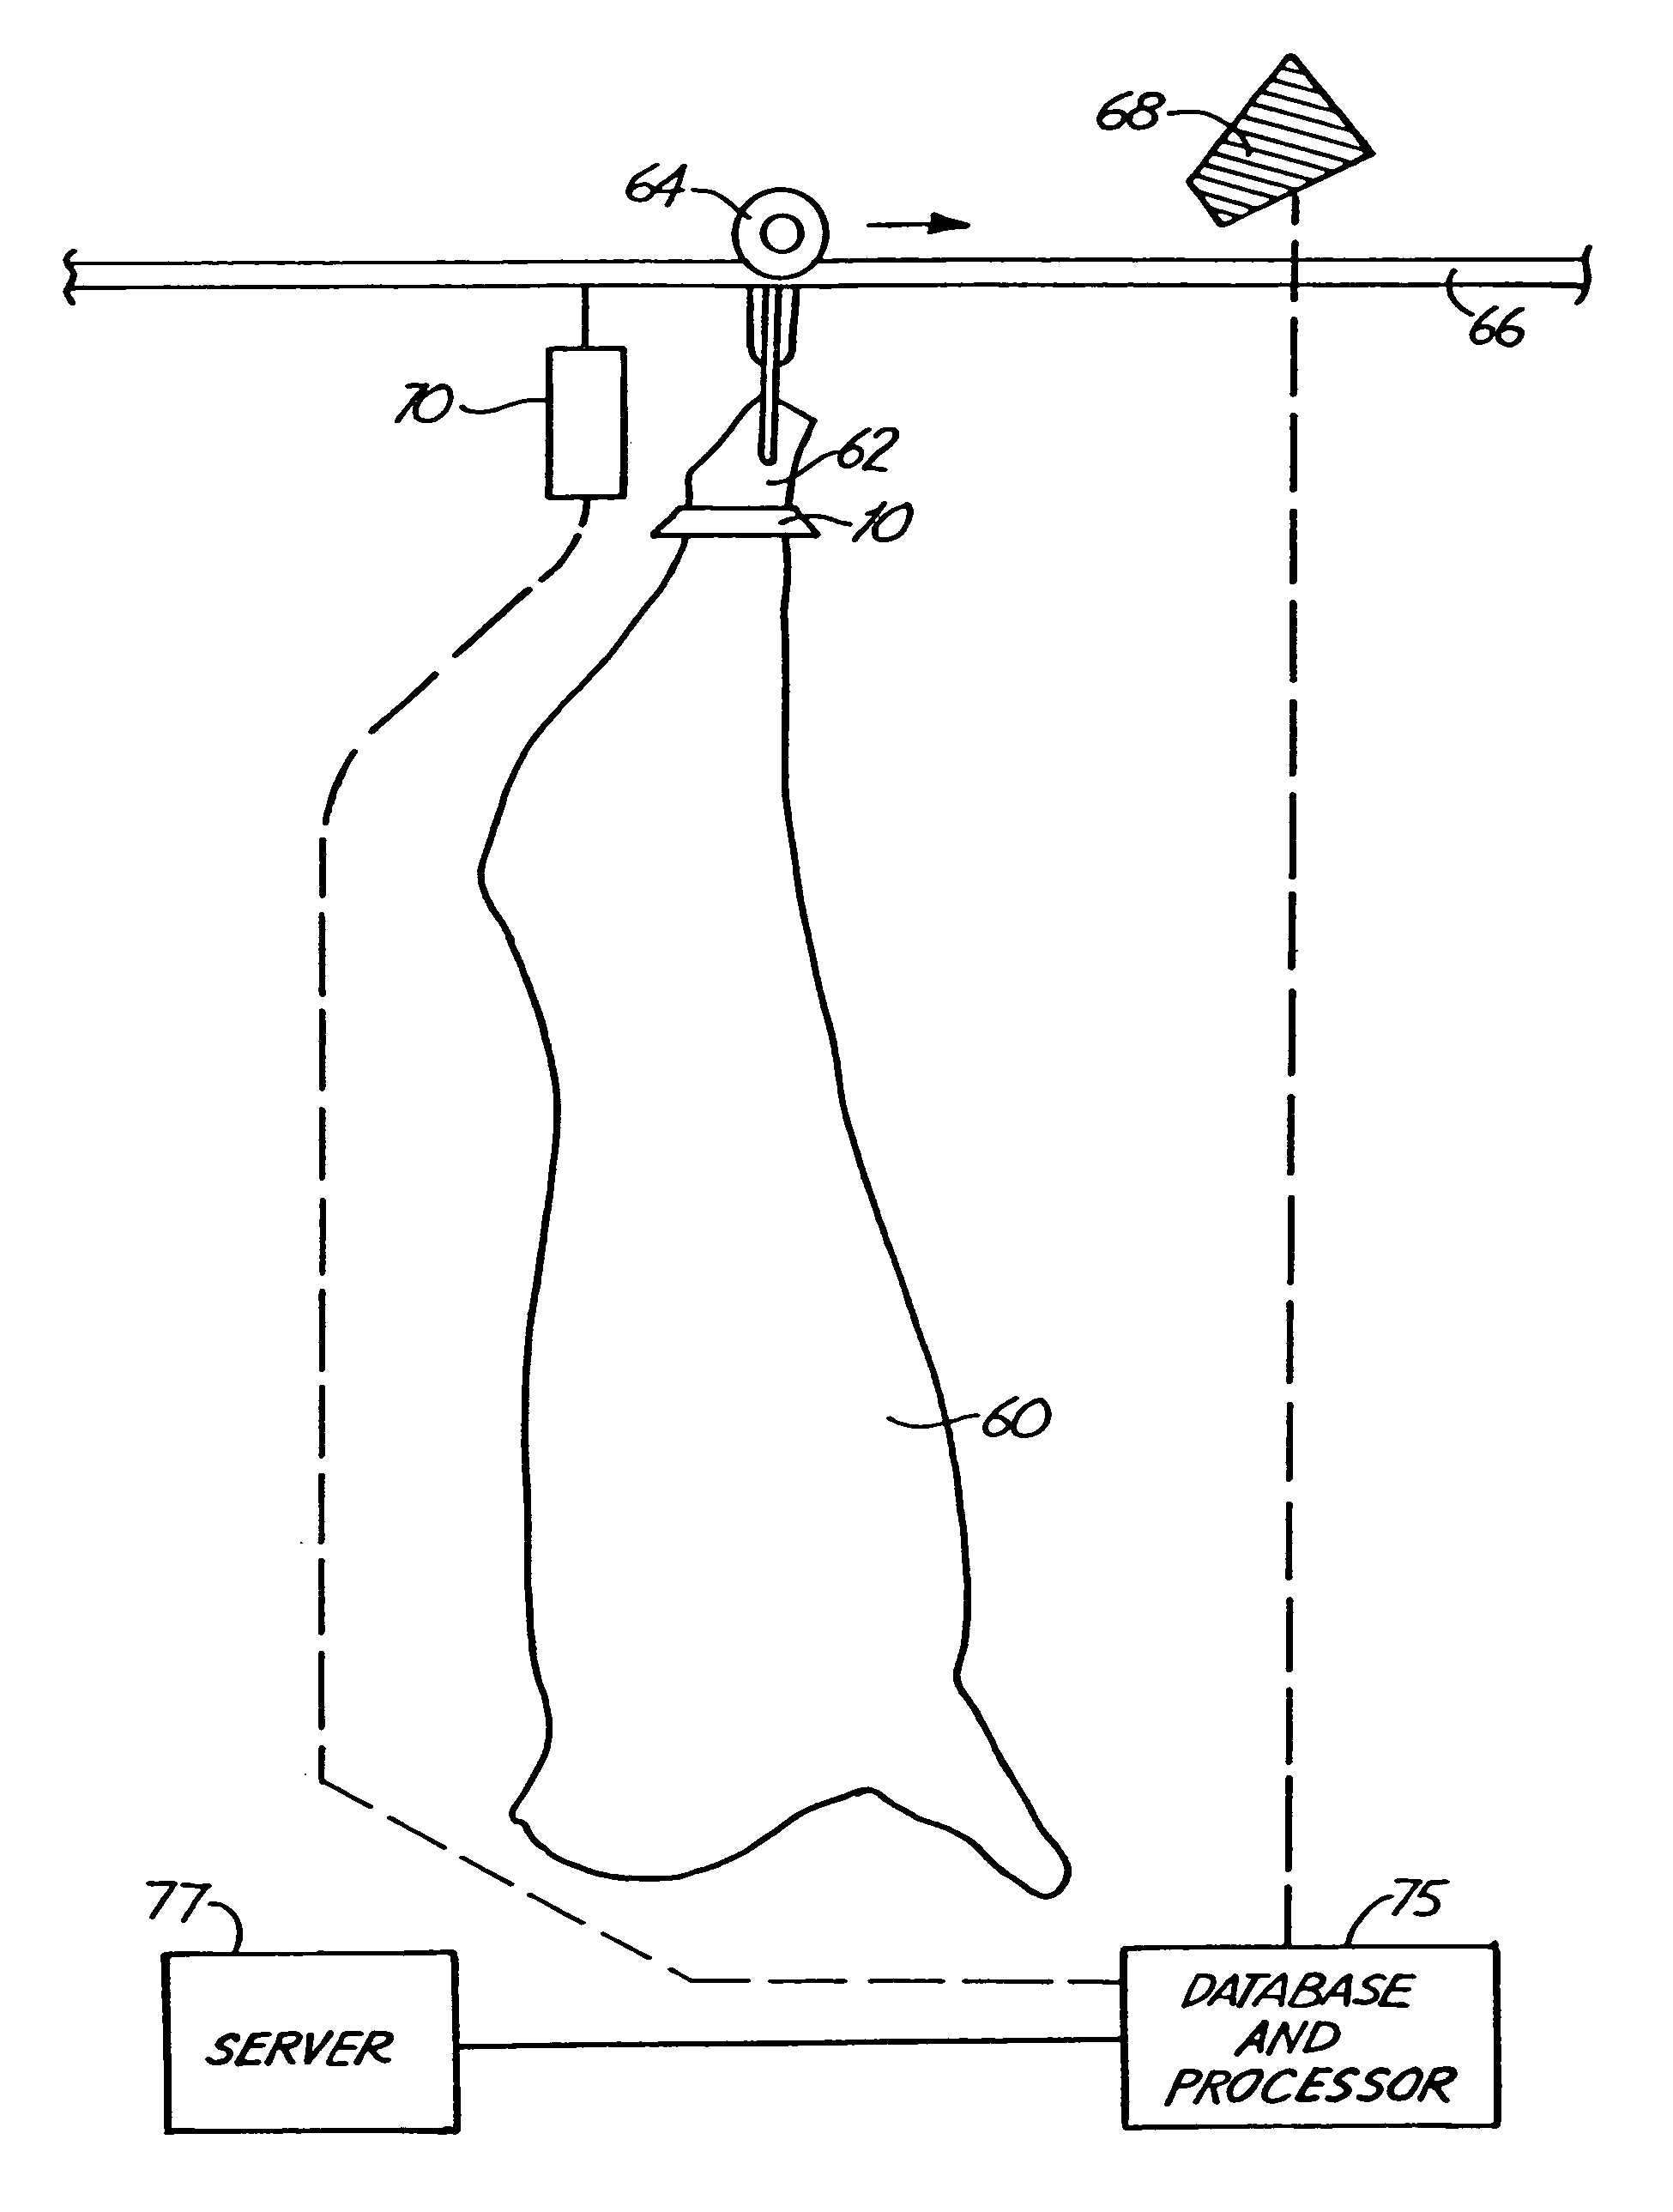 Method and apparatus for tracking carcasses